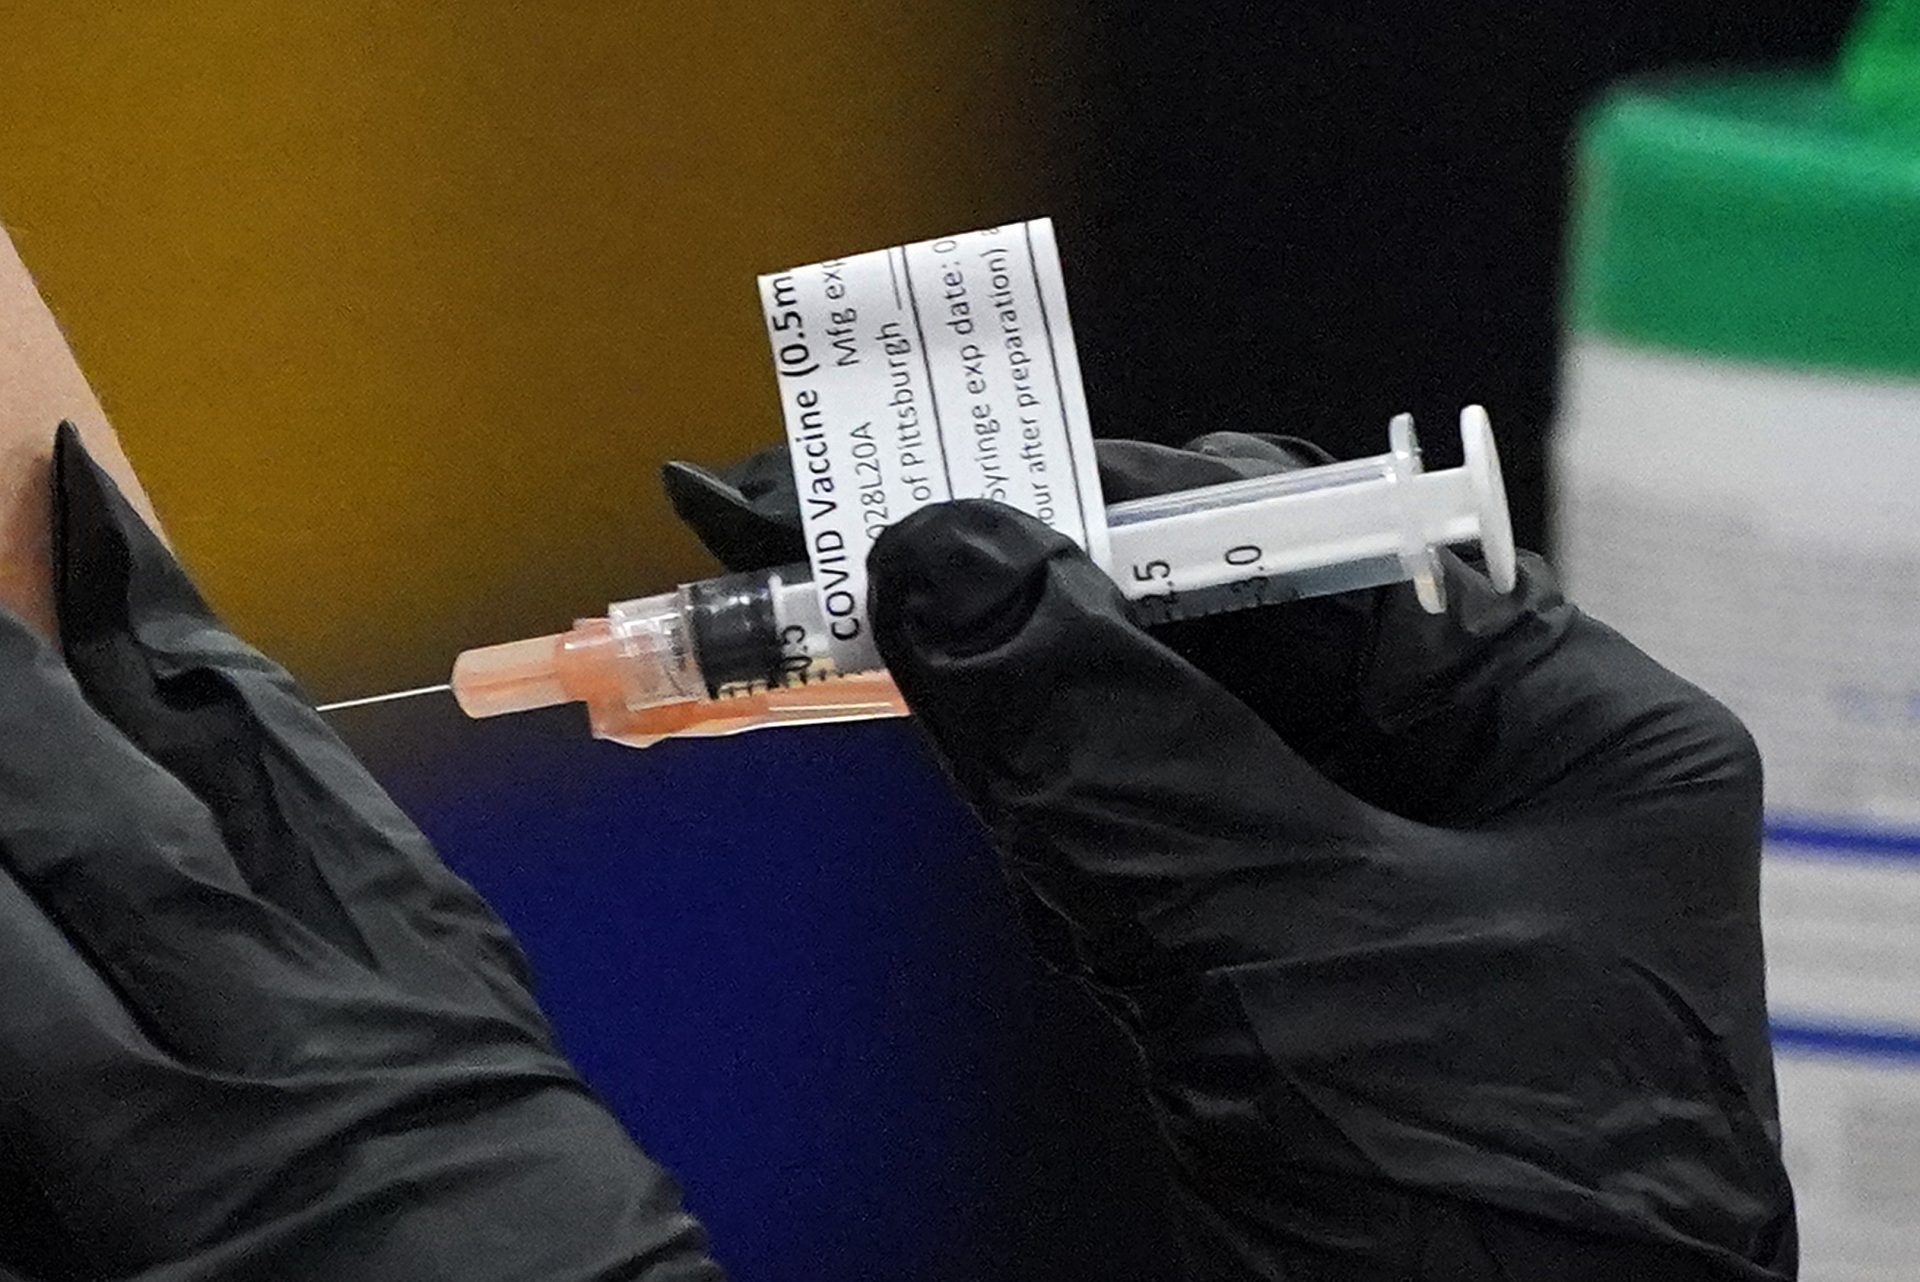 A student receives her first dose of the Moderna COVID-19 Vaccine during a vaccination clinic hosted by the University of Pittsburgh and the Allegheny County Health Department at the Petersen Events Center, in Pittsburgh, Thursday, Jan. 28, 2021.